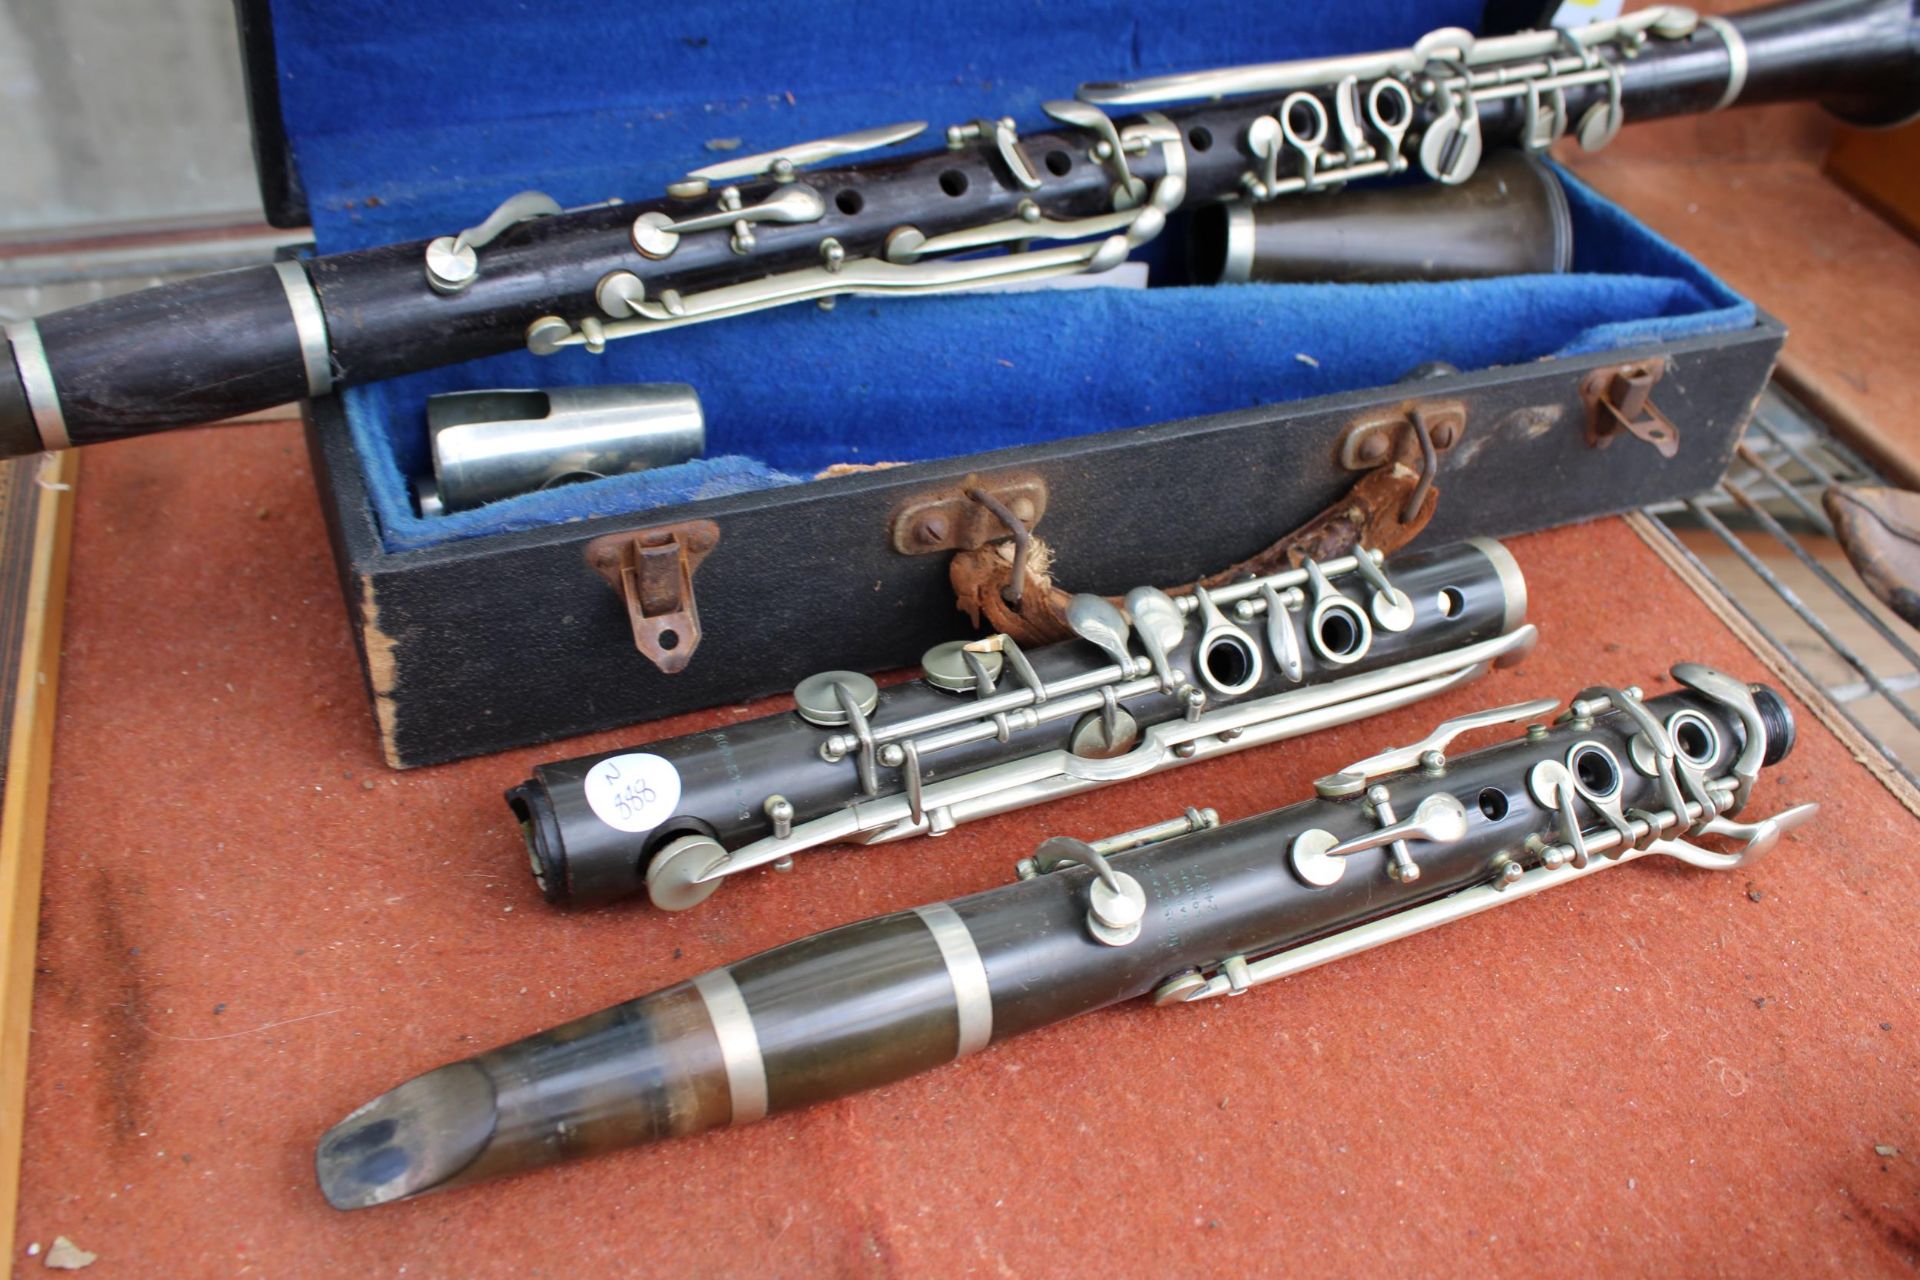 A BELIEVED COMPLETE VINTAGE JACQUES ALBERT CLARINET WITH CARRY CASE AND AN ASSORTMENT OF BOOZY - Image 2 of 3